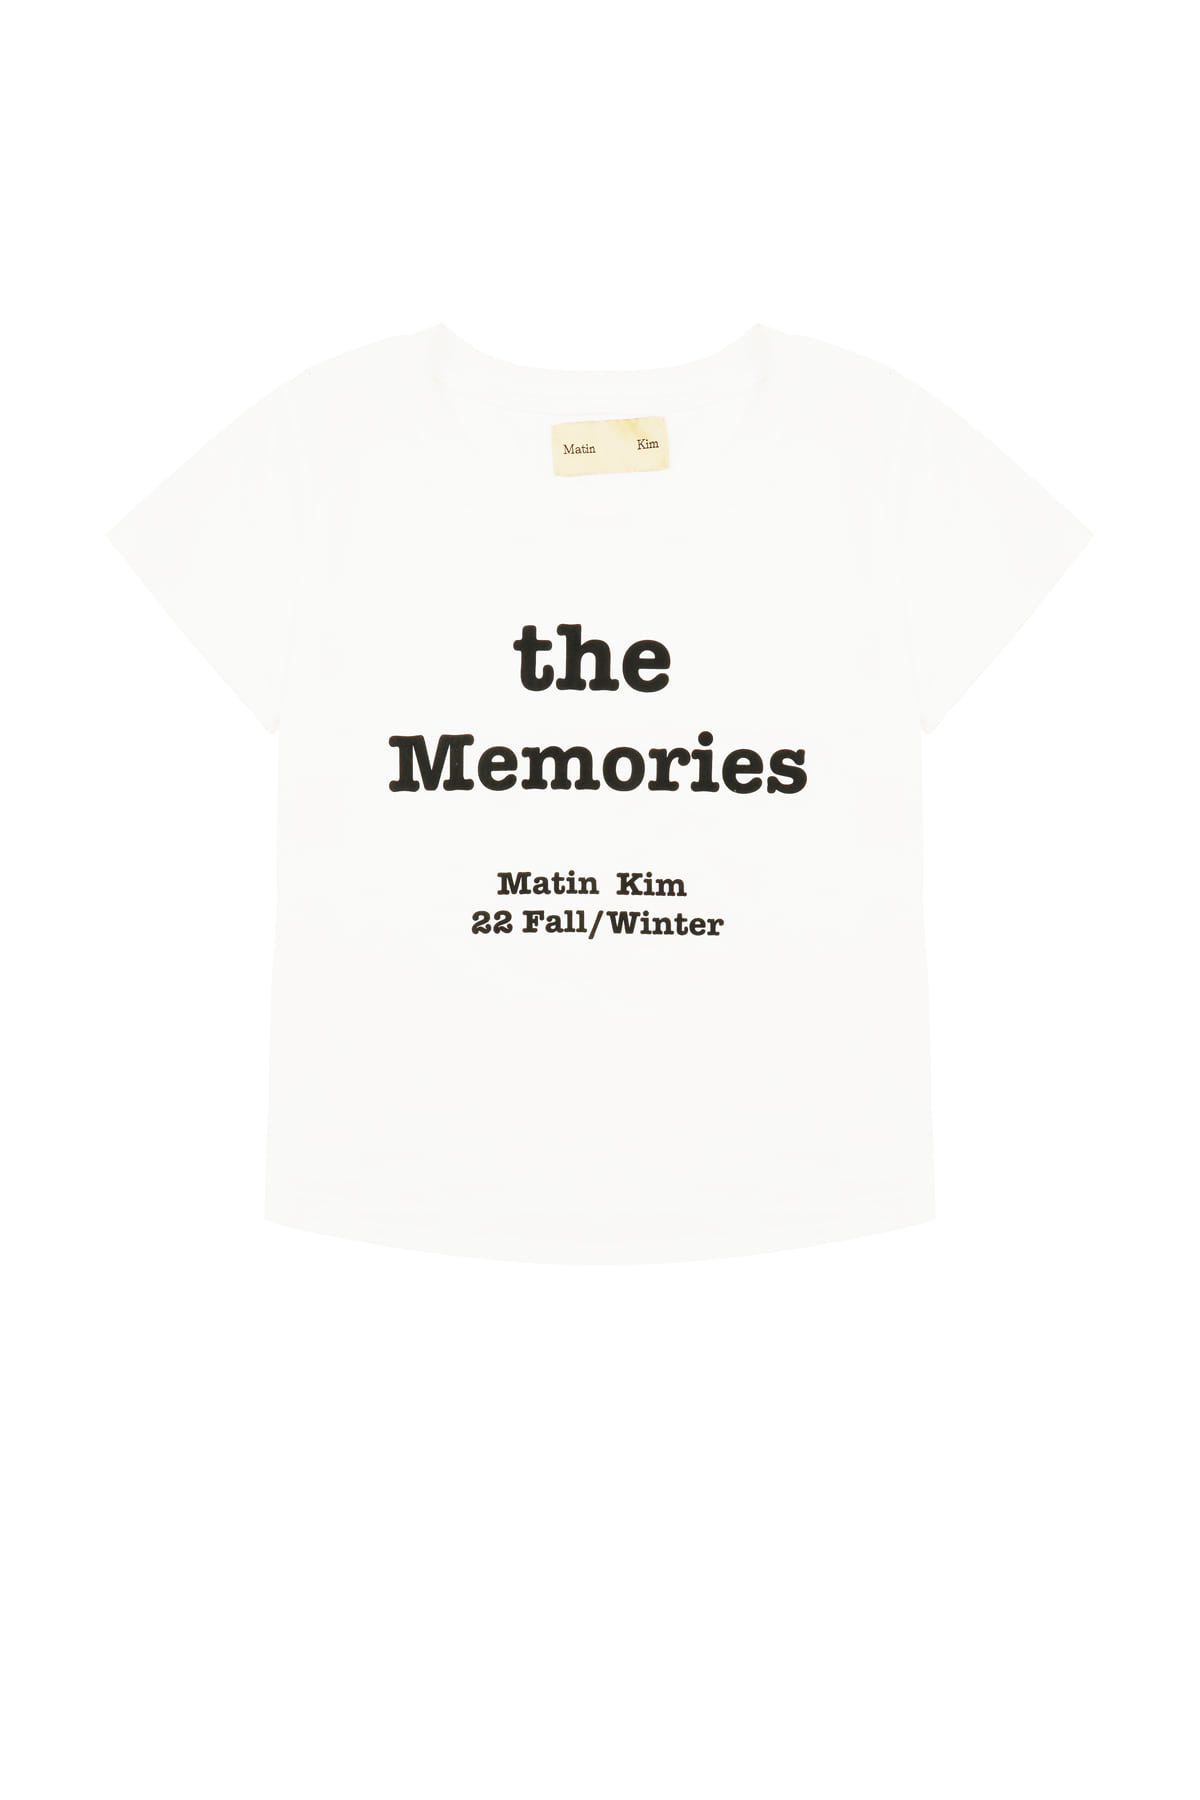 THE MEMORIES TOP IN WHITE